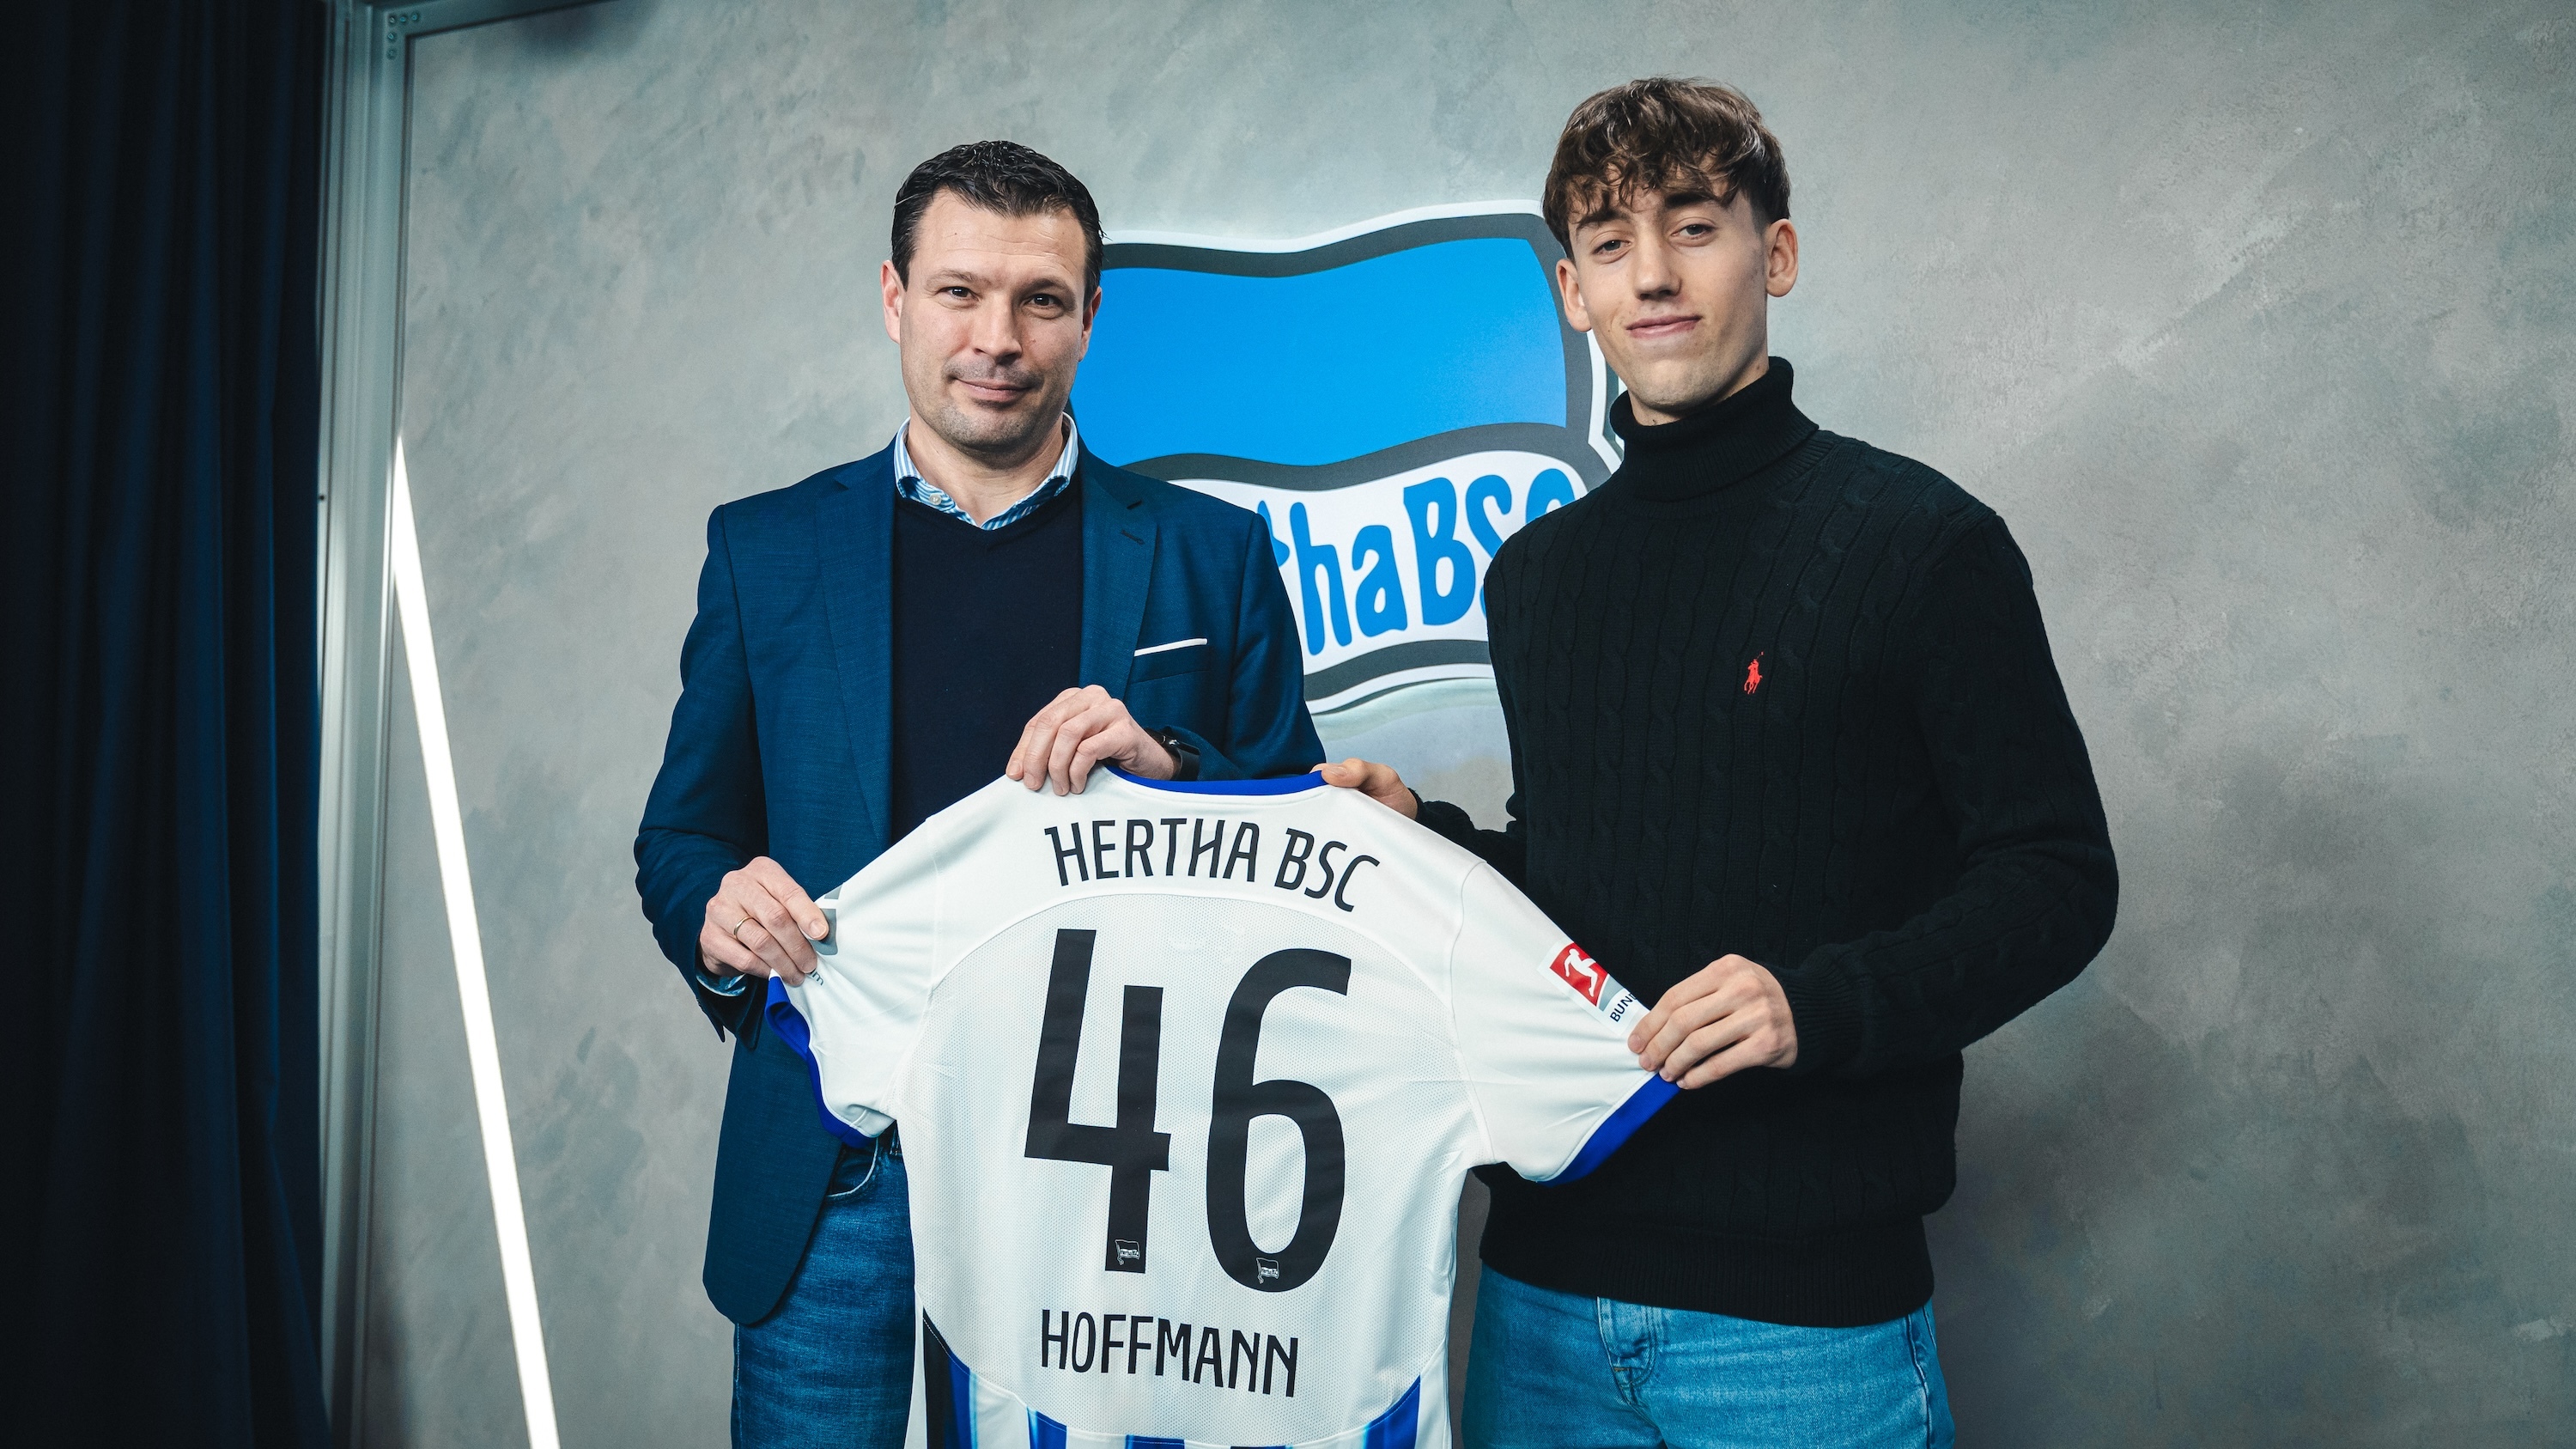 Tim Hoffmann and sporting director Benjamin Weber hold a Hertha shirt aloft in front of the camera.